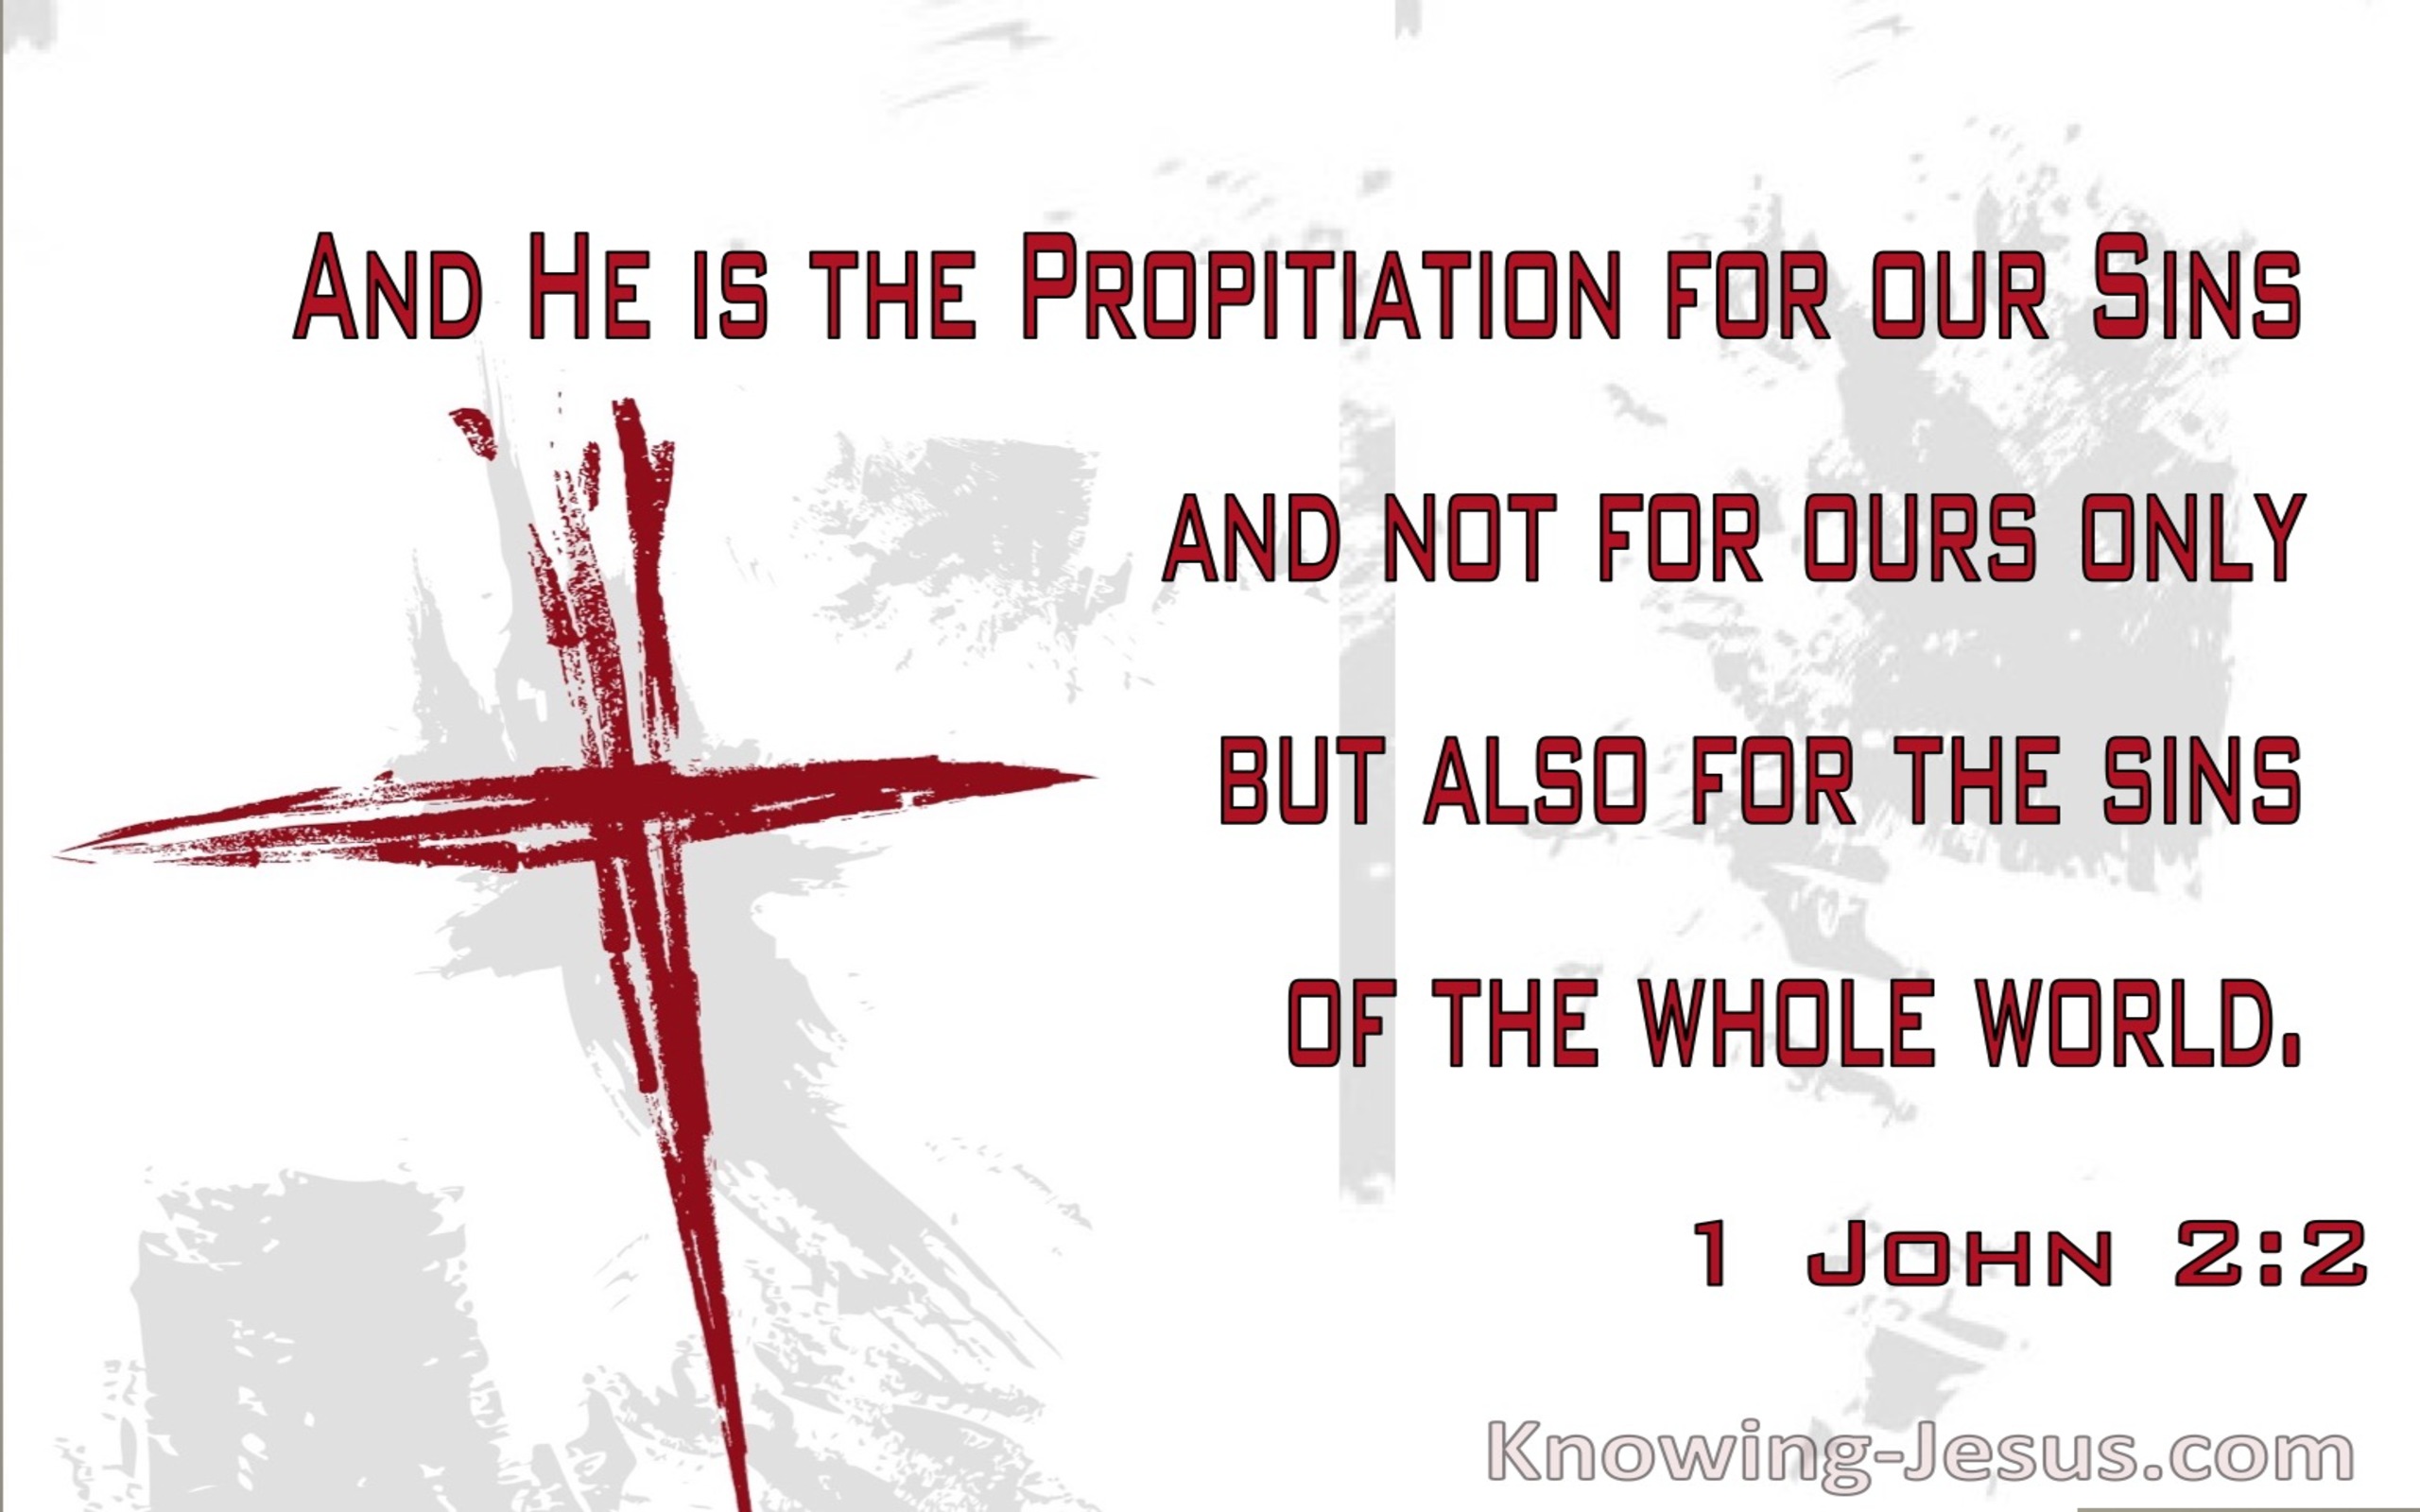 1 John 2:2 He Is the Propitiation For Our Sins (utmost)10:15